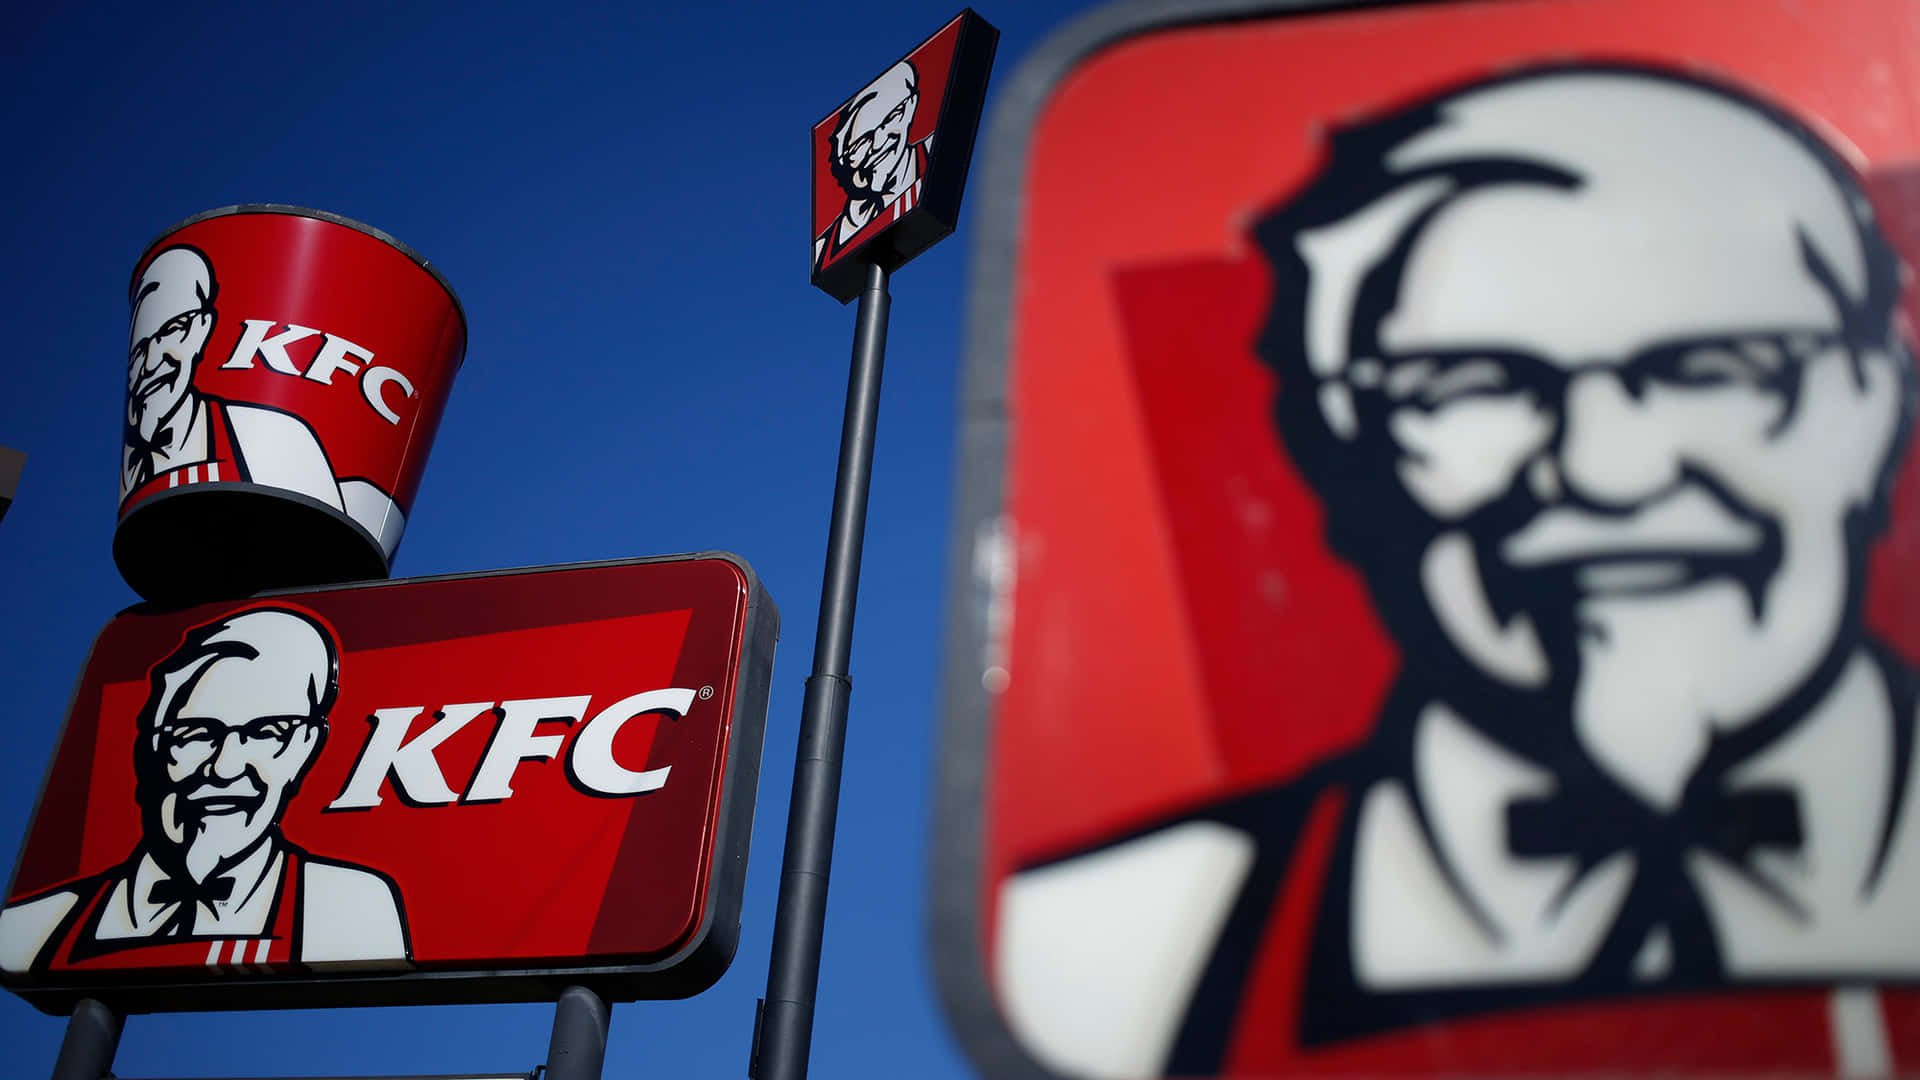 Try KFC's Famous Fried Chicken